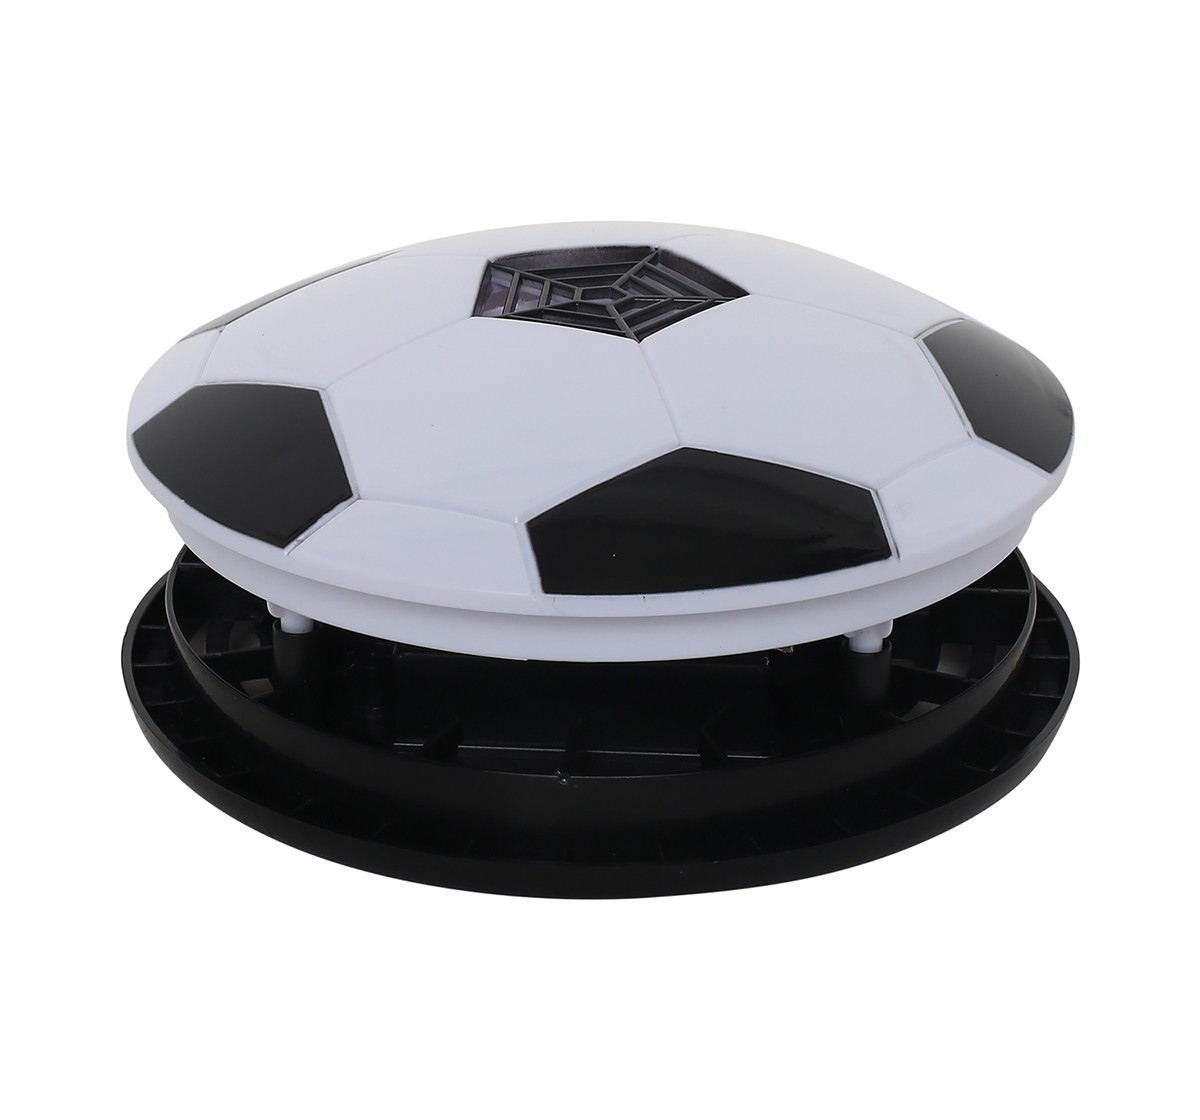 Hostfull Rowan Air Soccer Hover Disk Indoor Sports for Kids age 3Y+ 